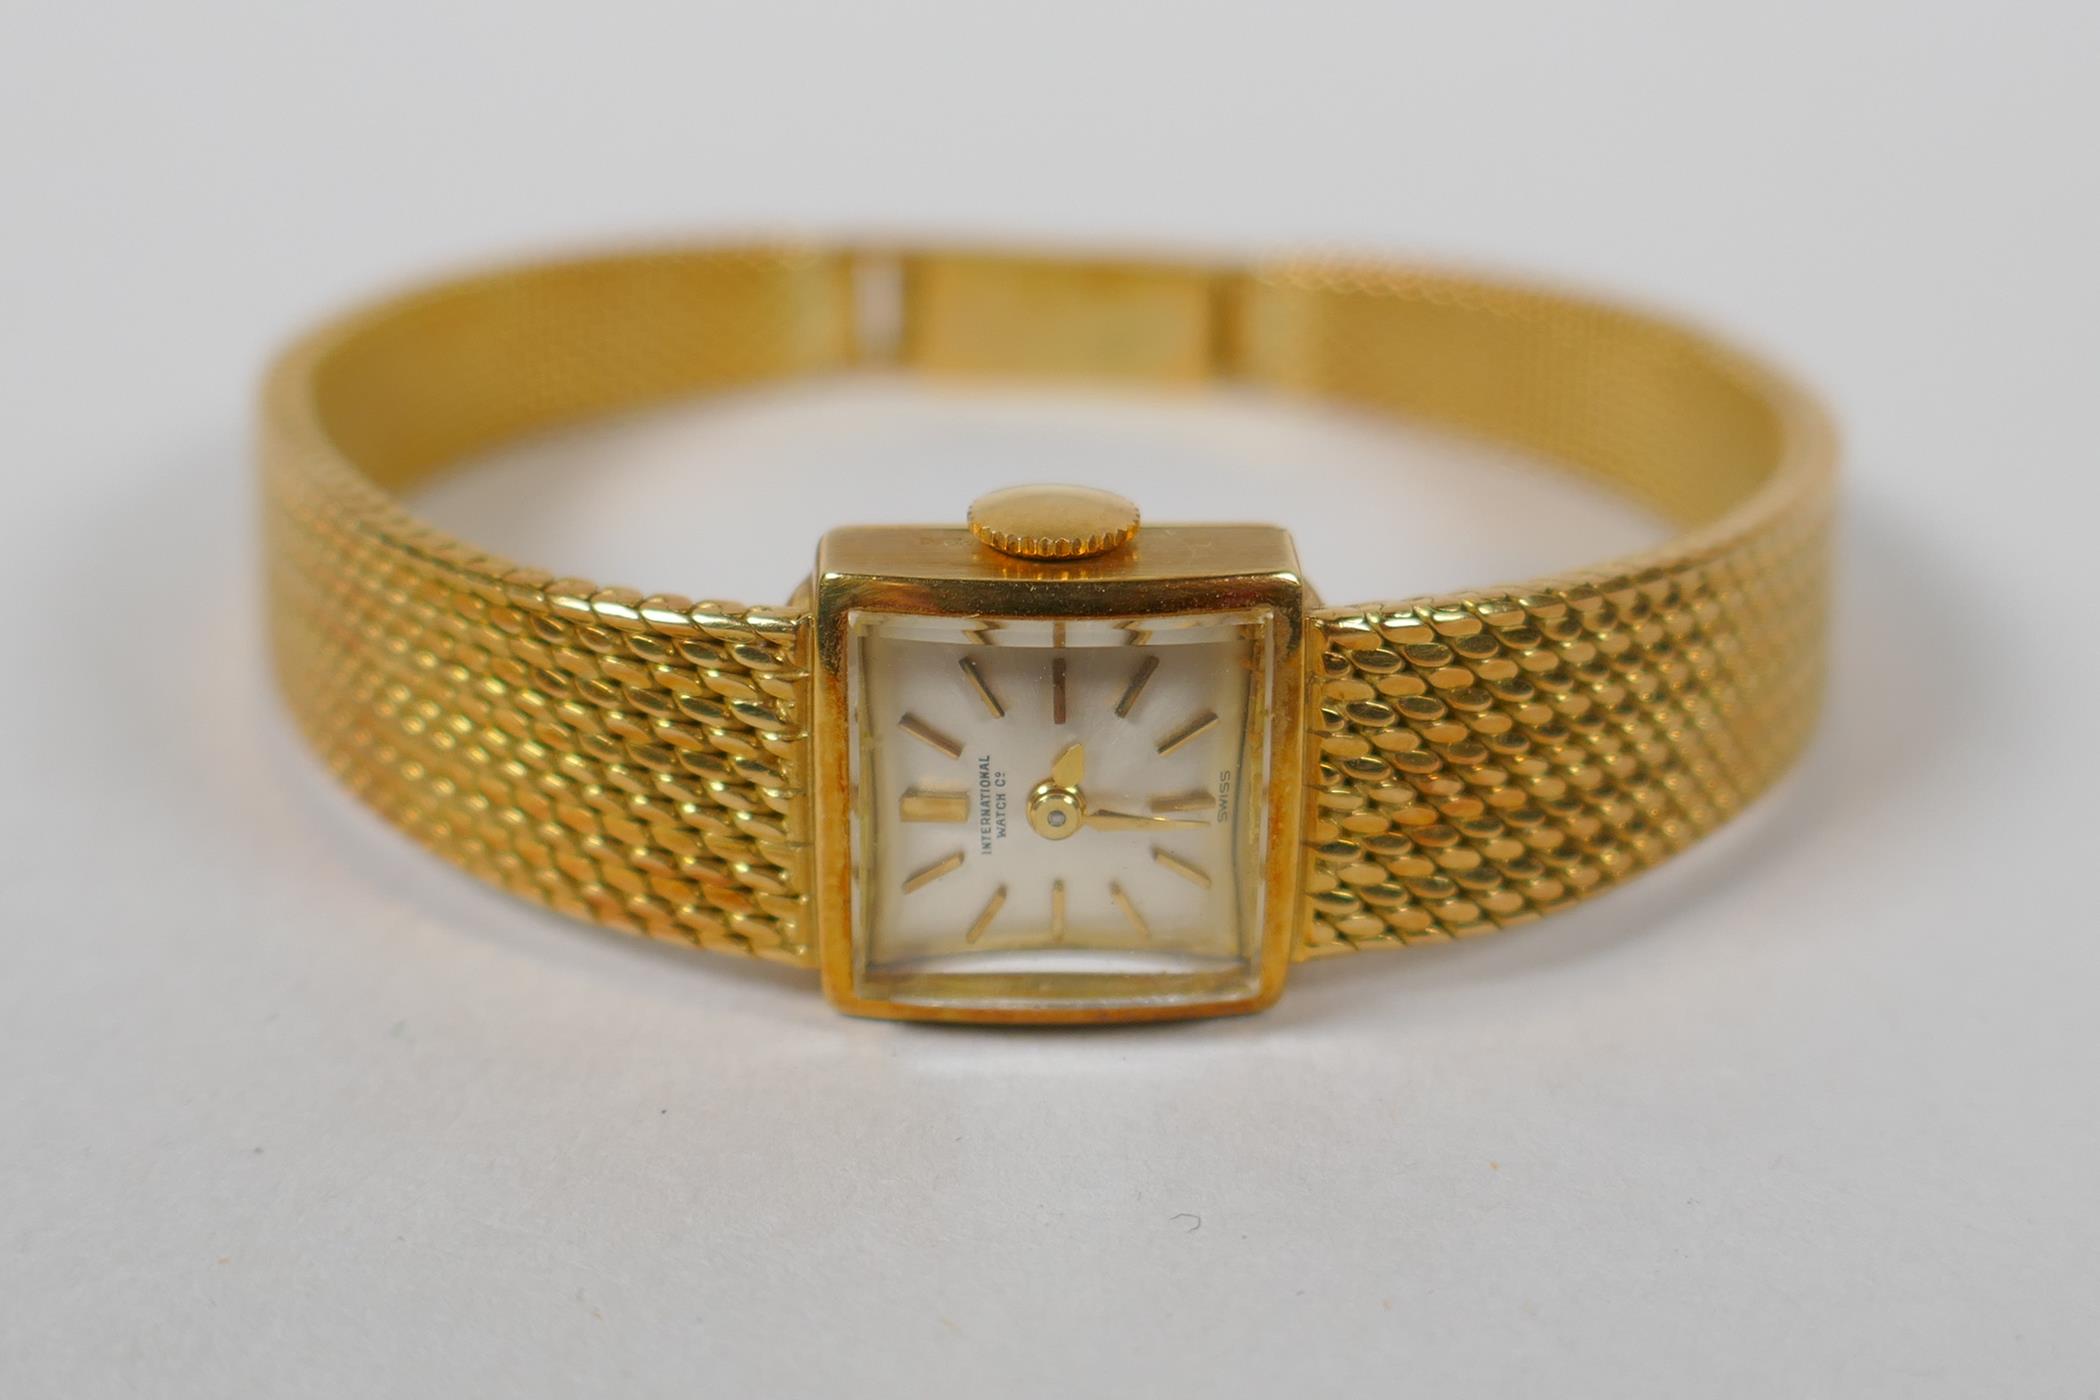 An International Watch Co 18ct gold lady's cocktail watch, 33.3g gross - Image 6 of 6